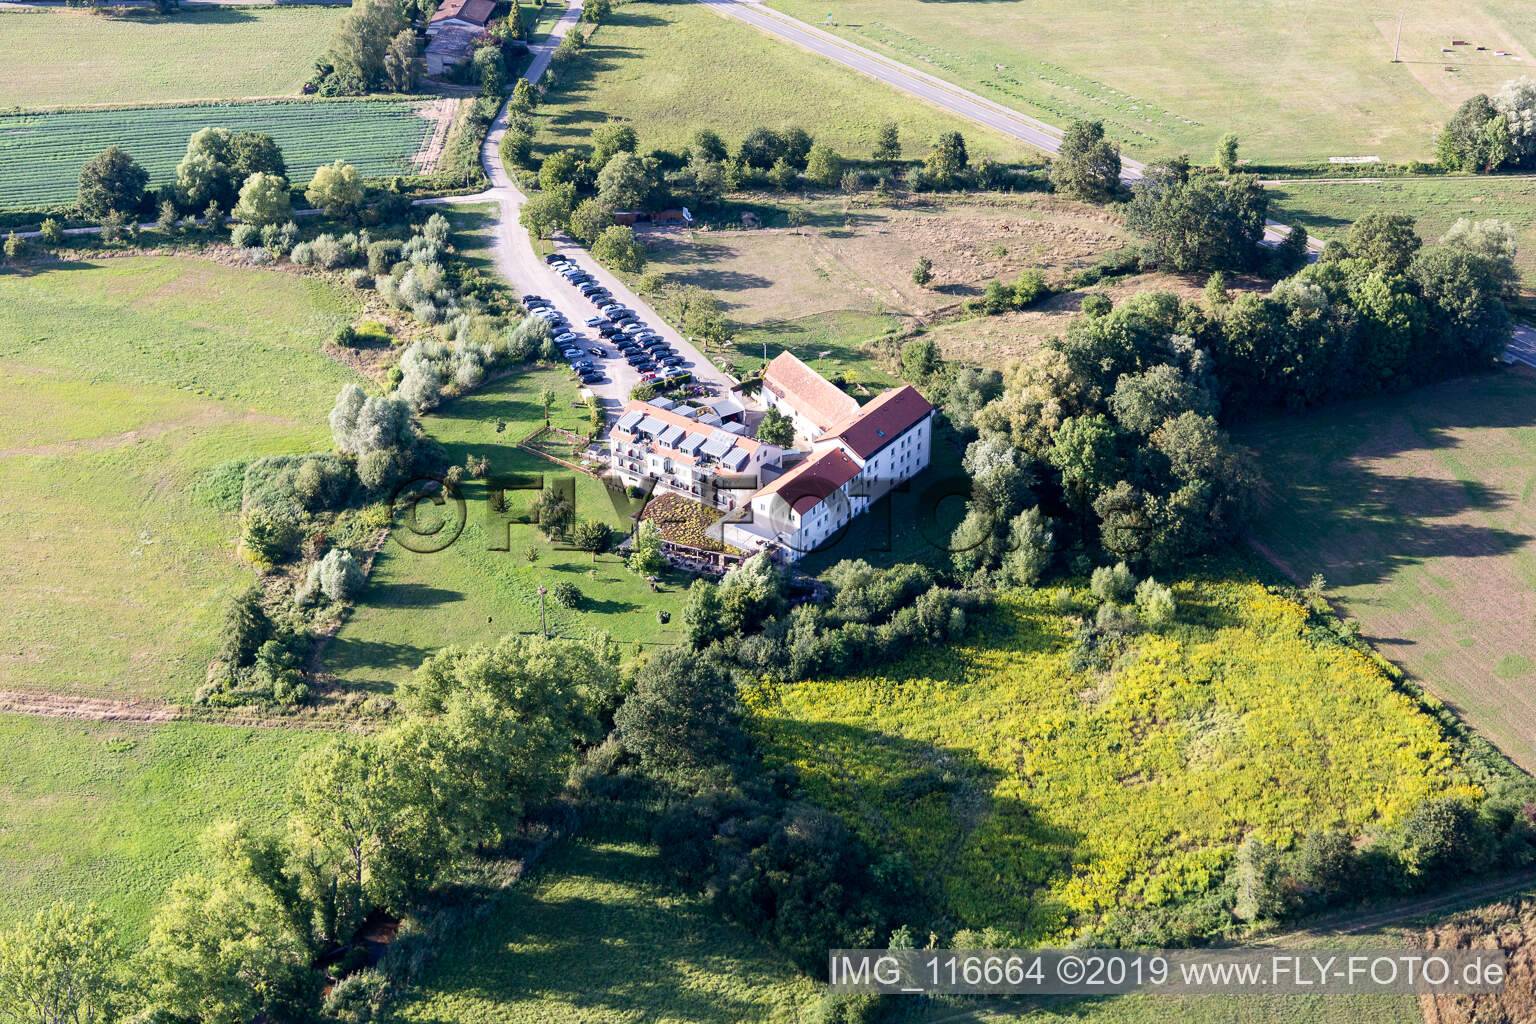 Aerial view of Complex of the hotel building Zeiskamer Muehle in Zeiskam in the state Rhineland-Palatinate, Germany